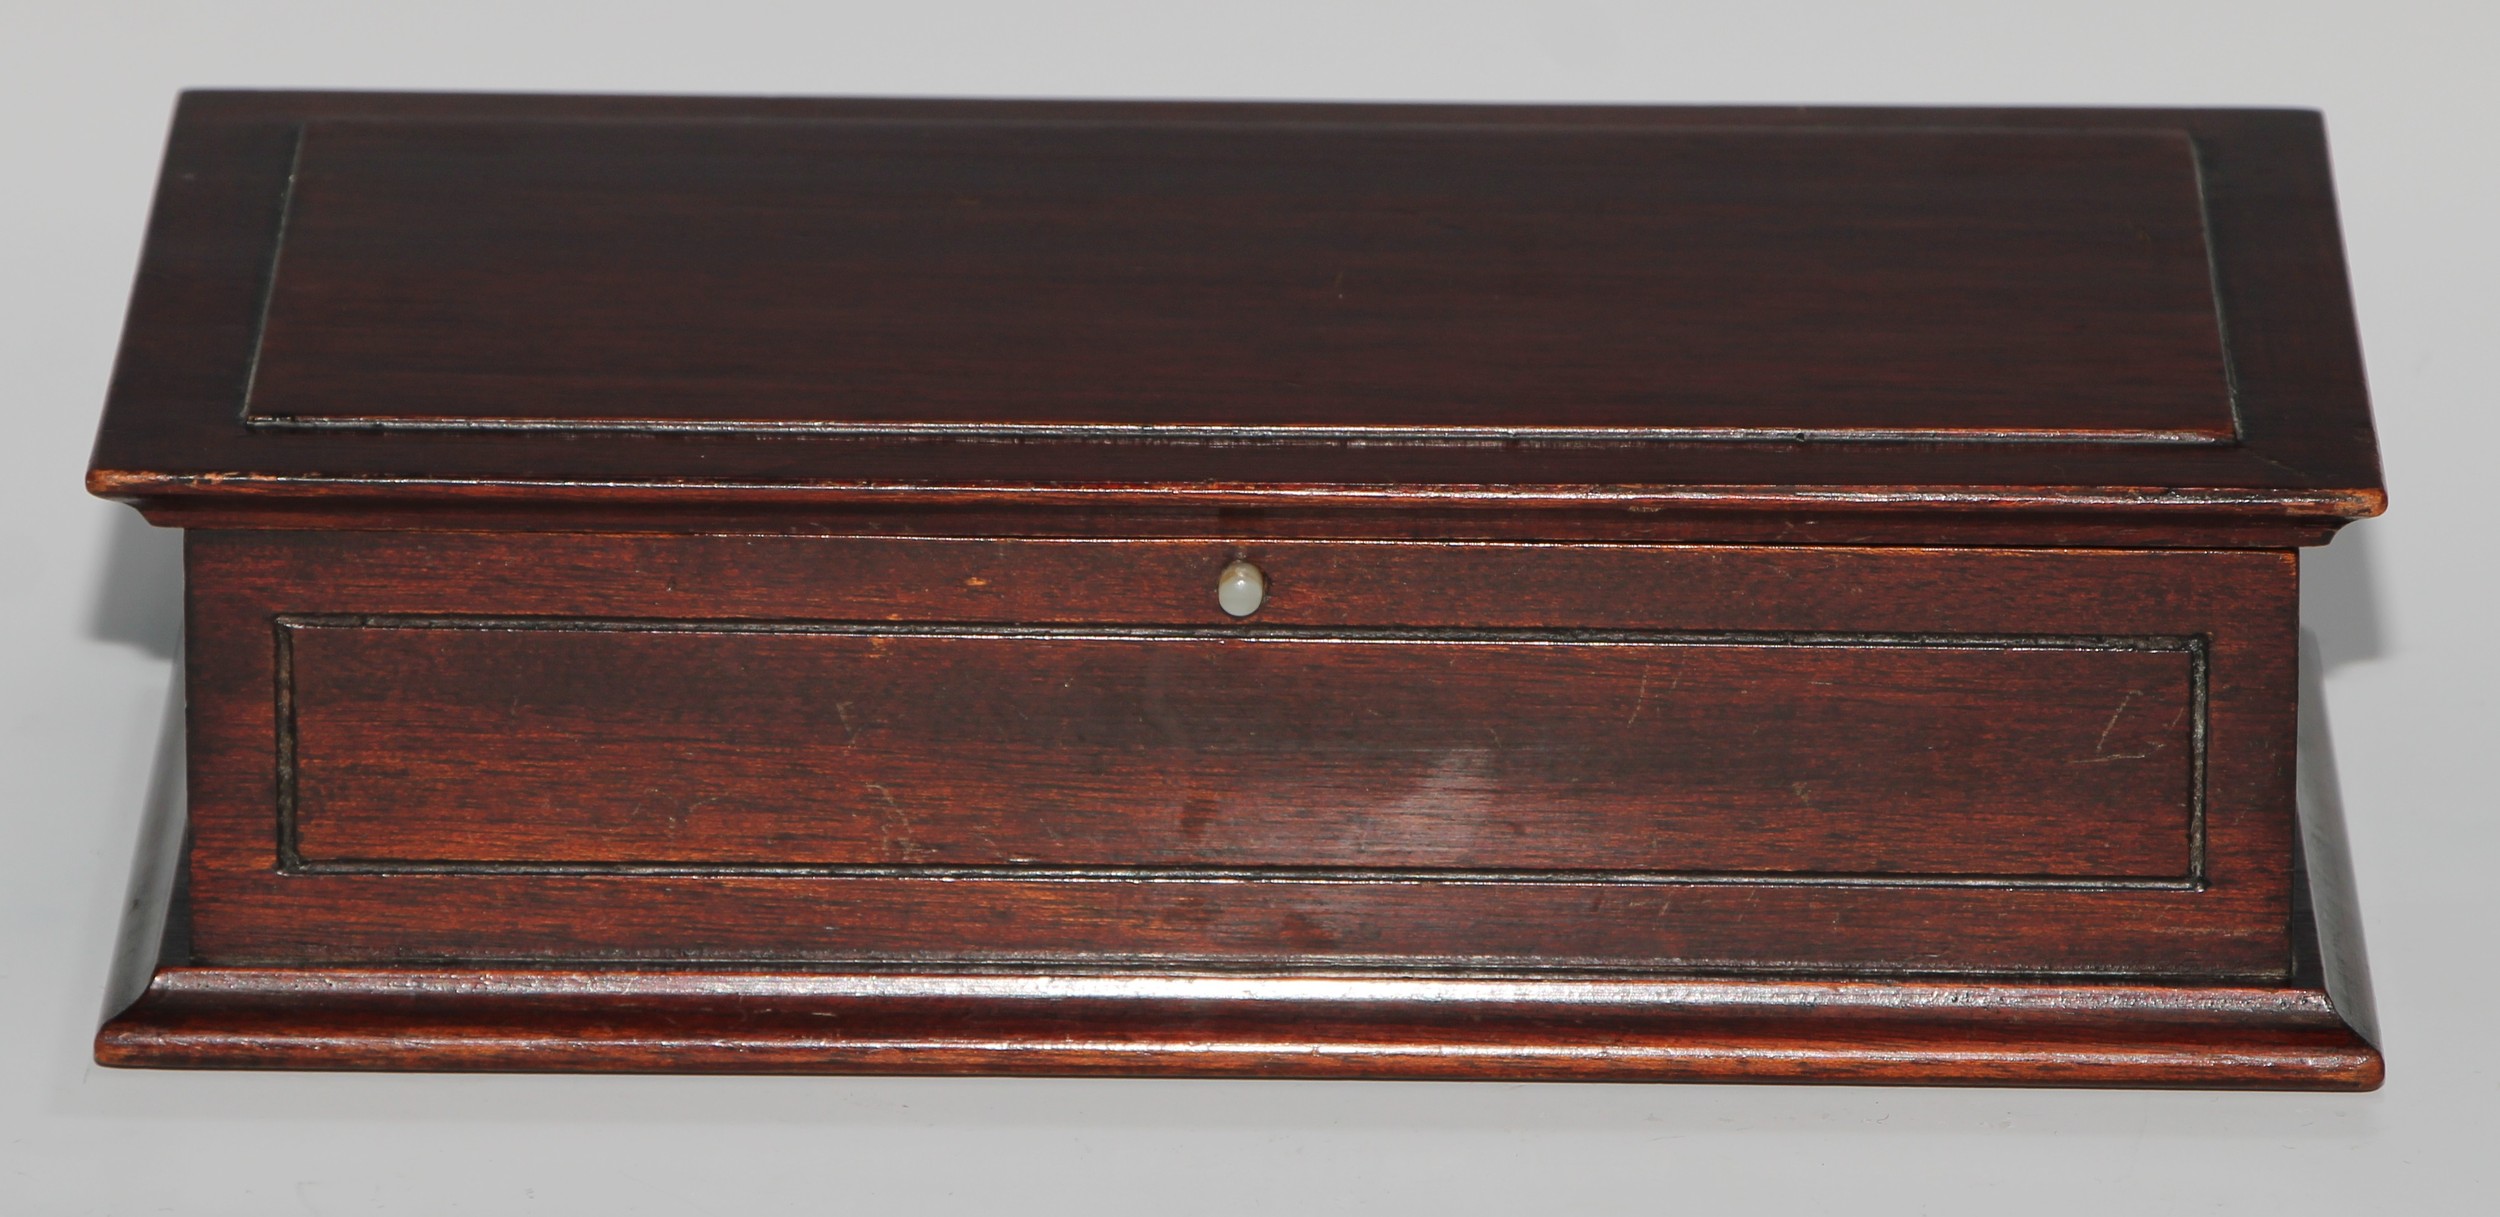 An early 20th century salvaged maritime timber rectangular playing card box, mahogany from the "